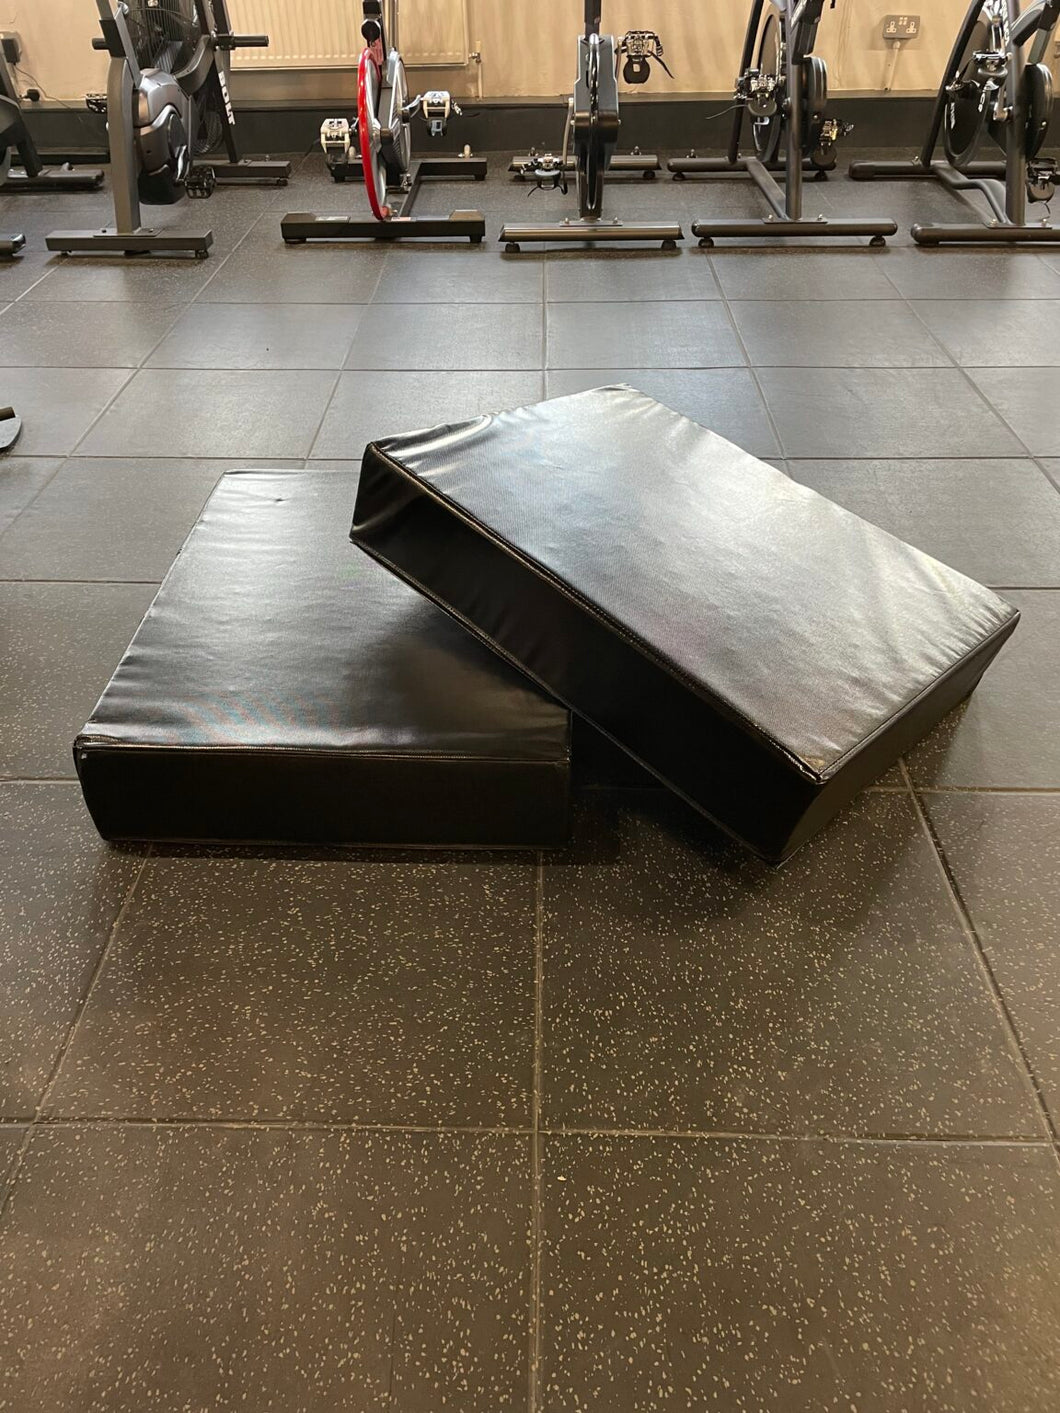 Weightlifting Drop Pads